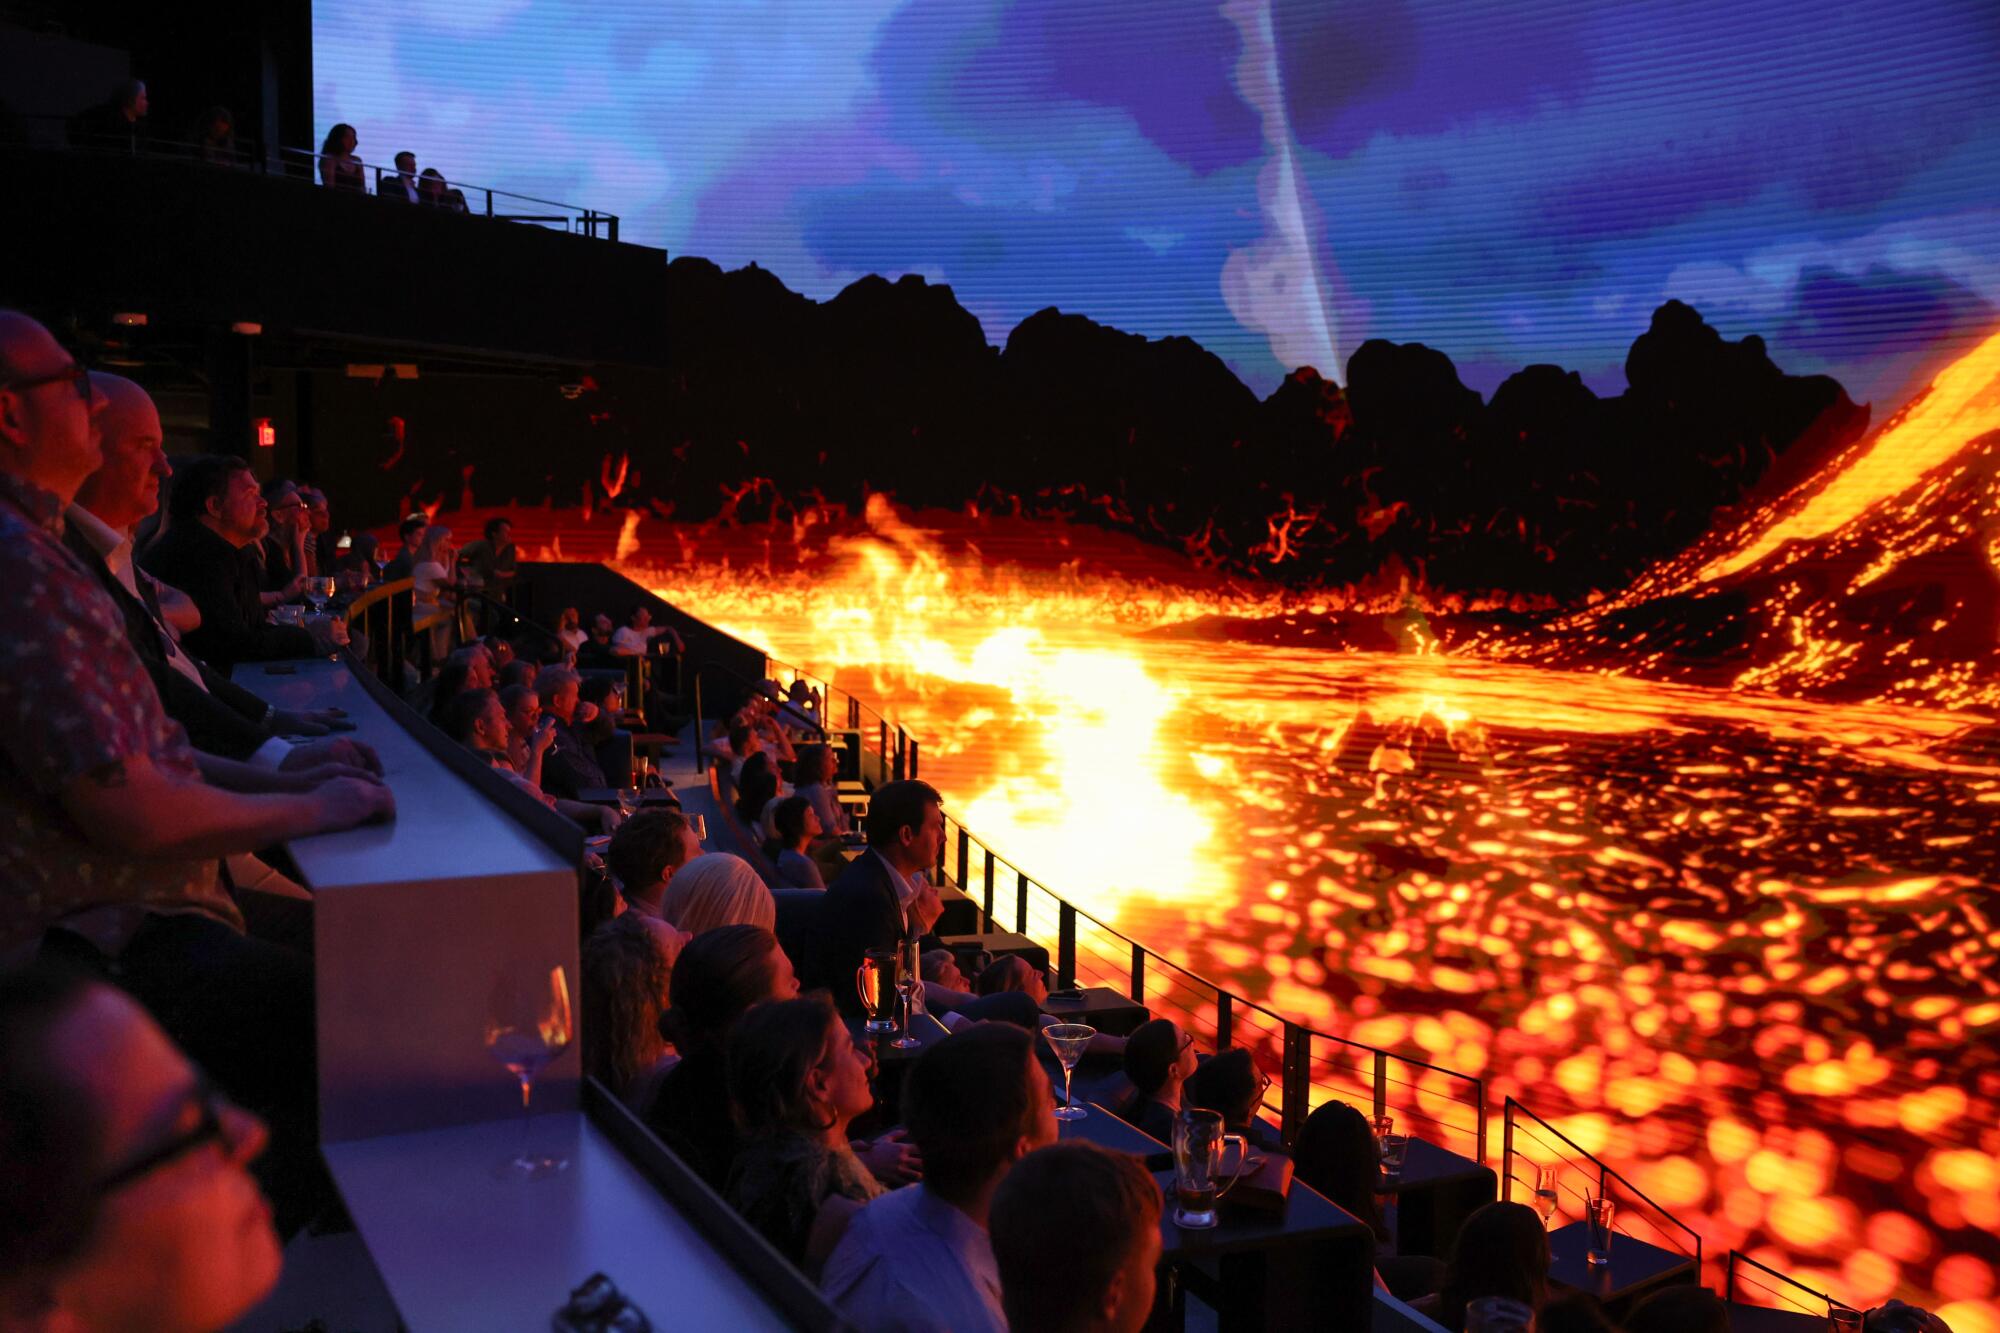 Seated audience members watch what appears to be bubbling lava under a cloudy sky